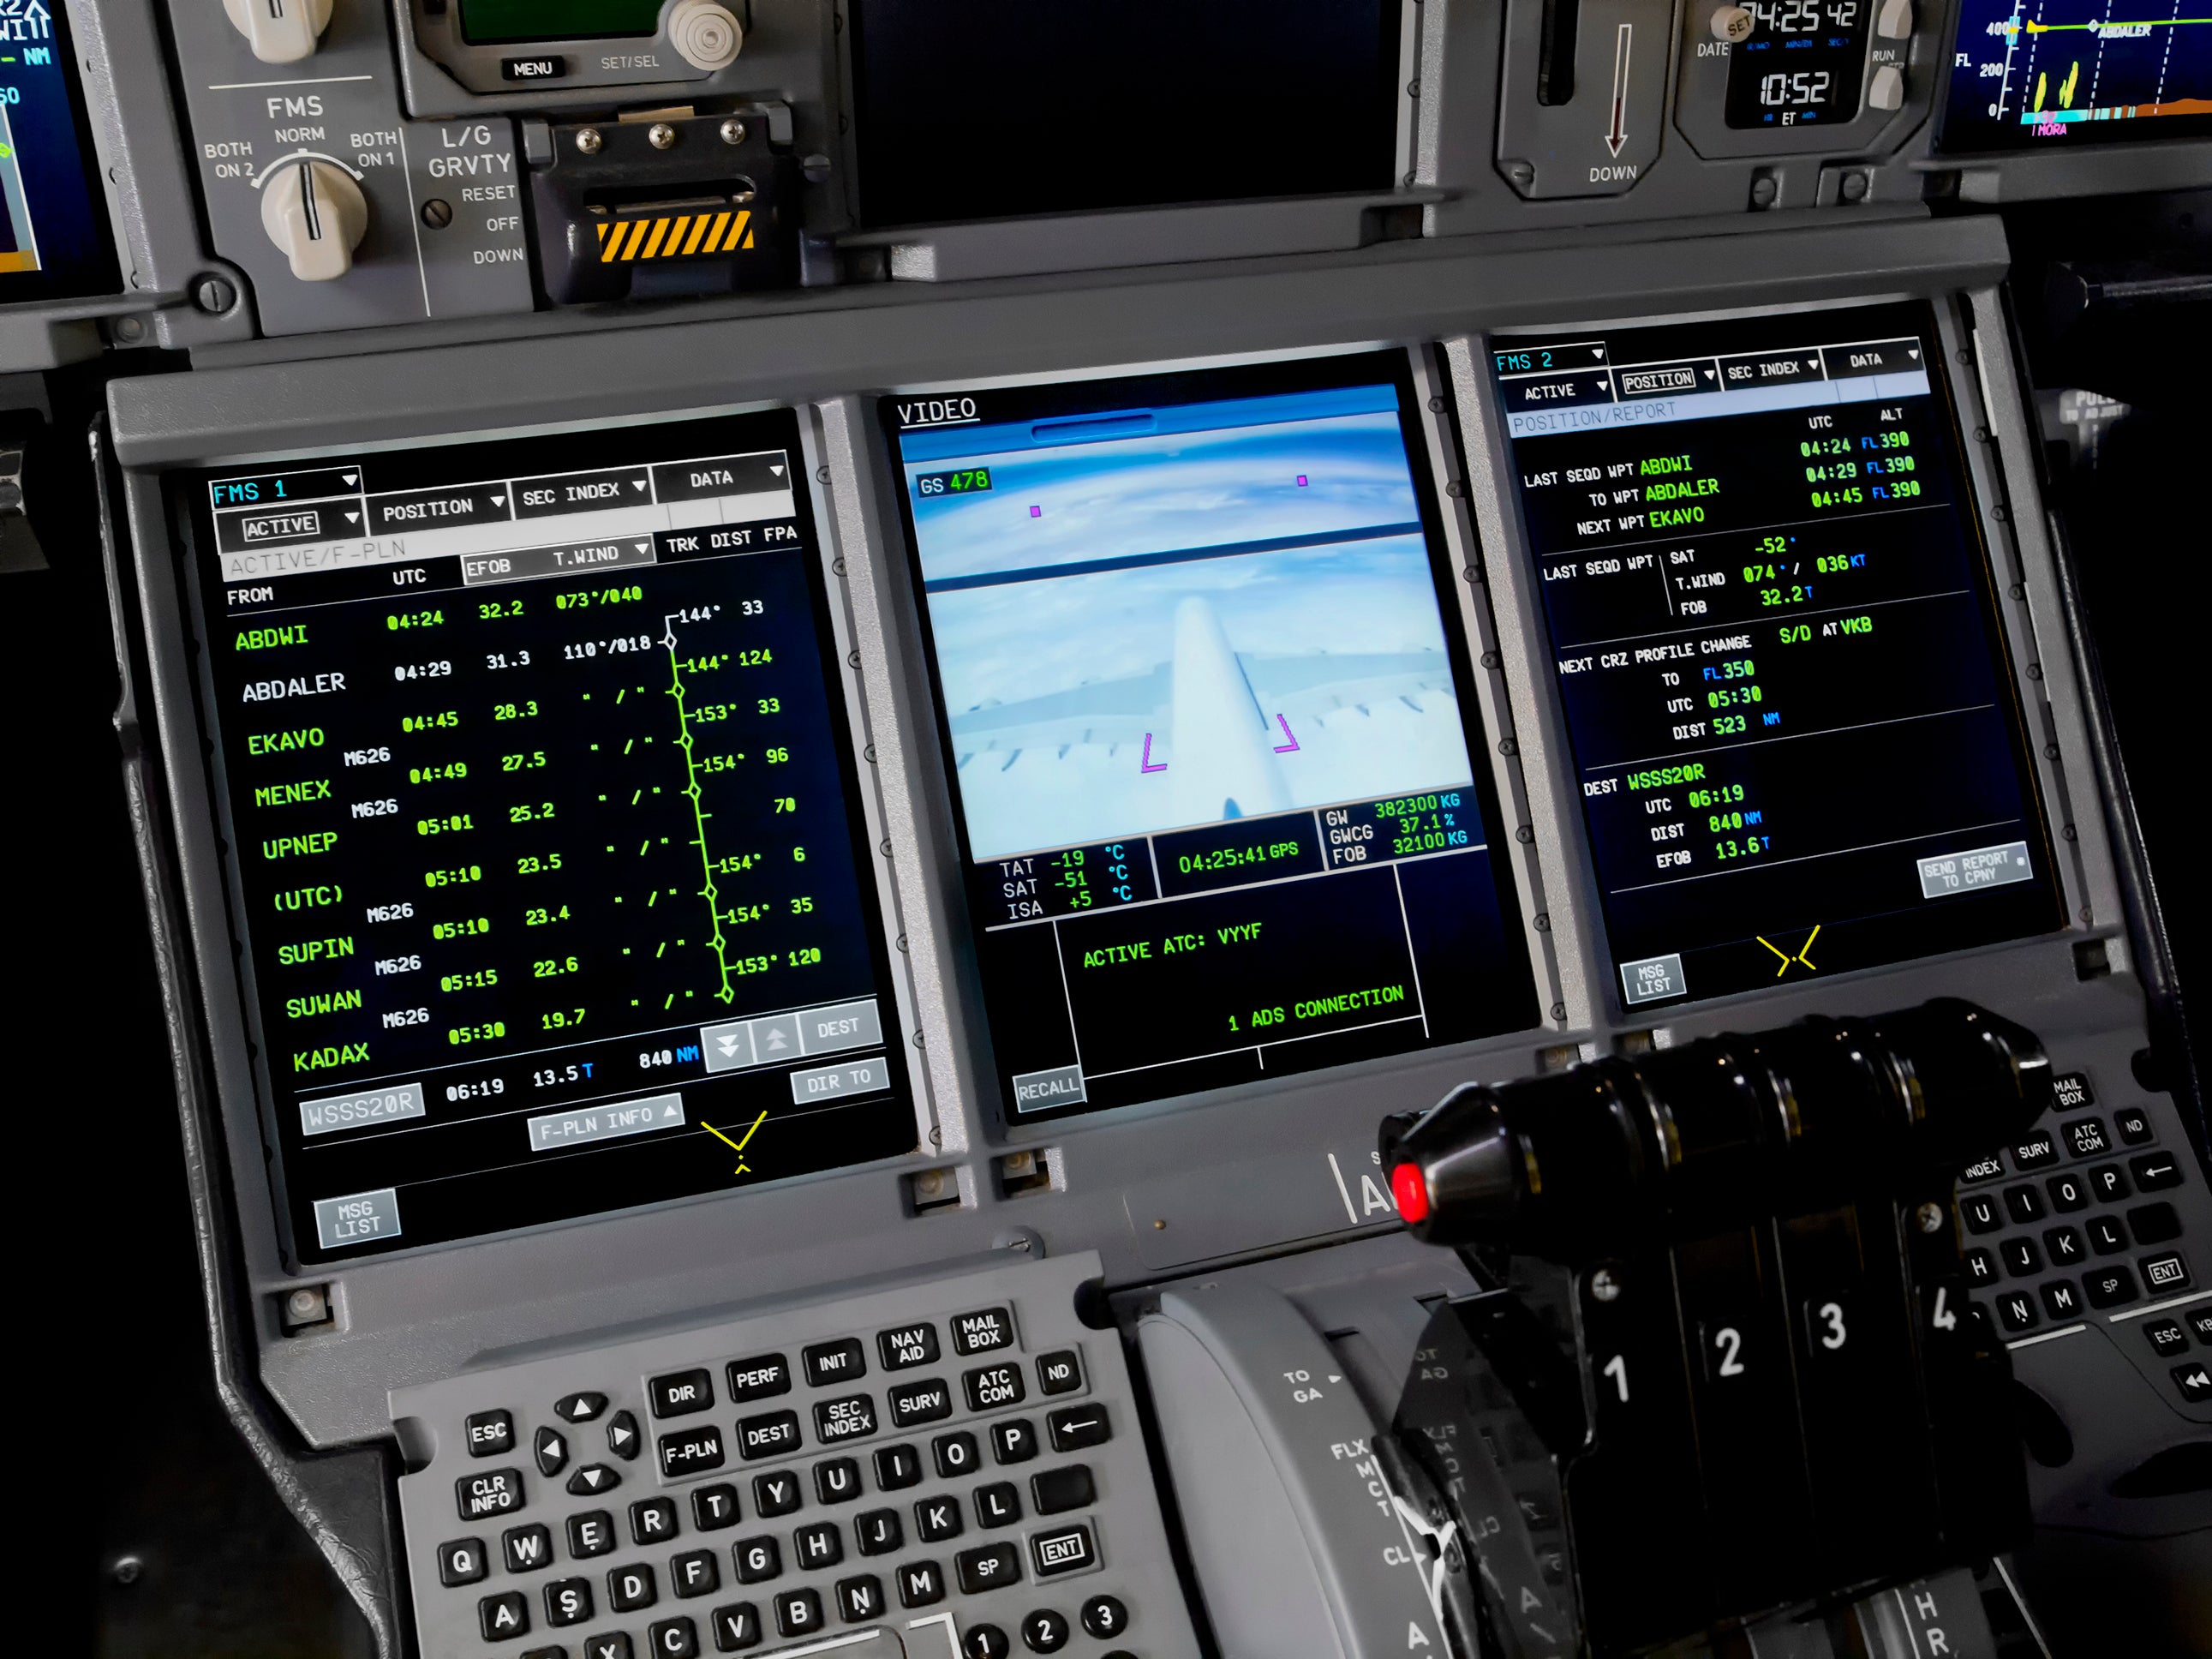 Image of an Airbus A380 cockpit.